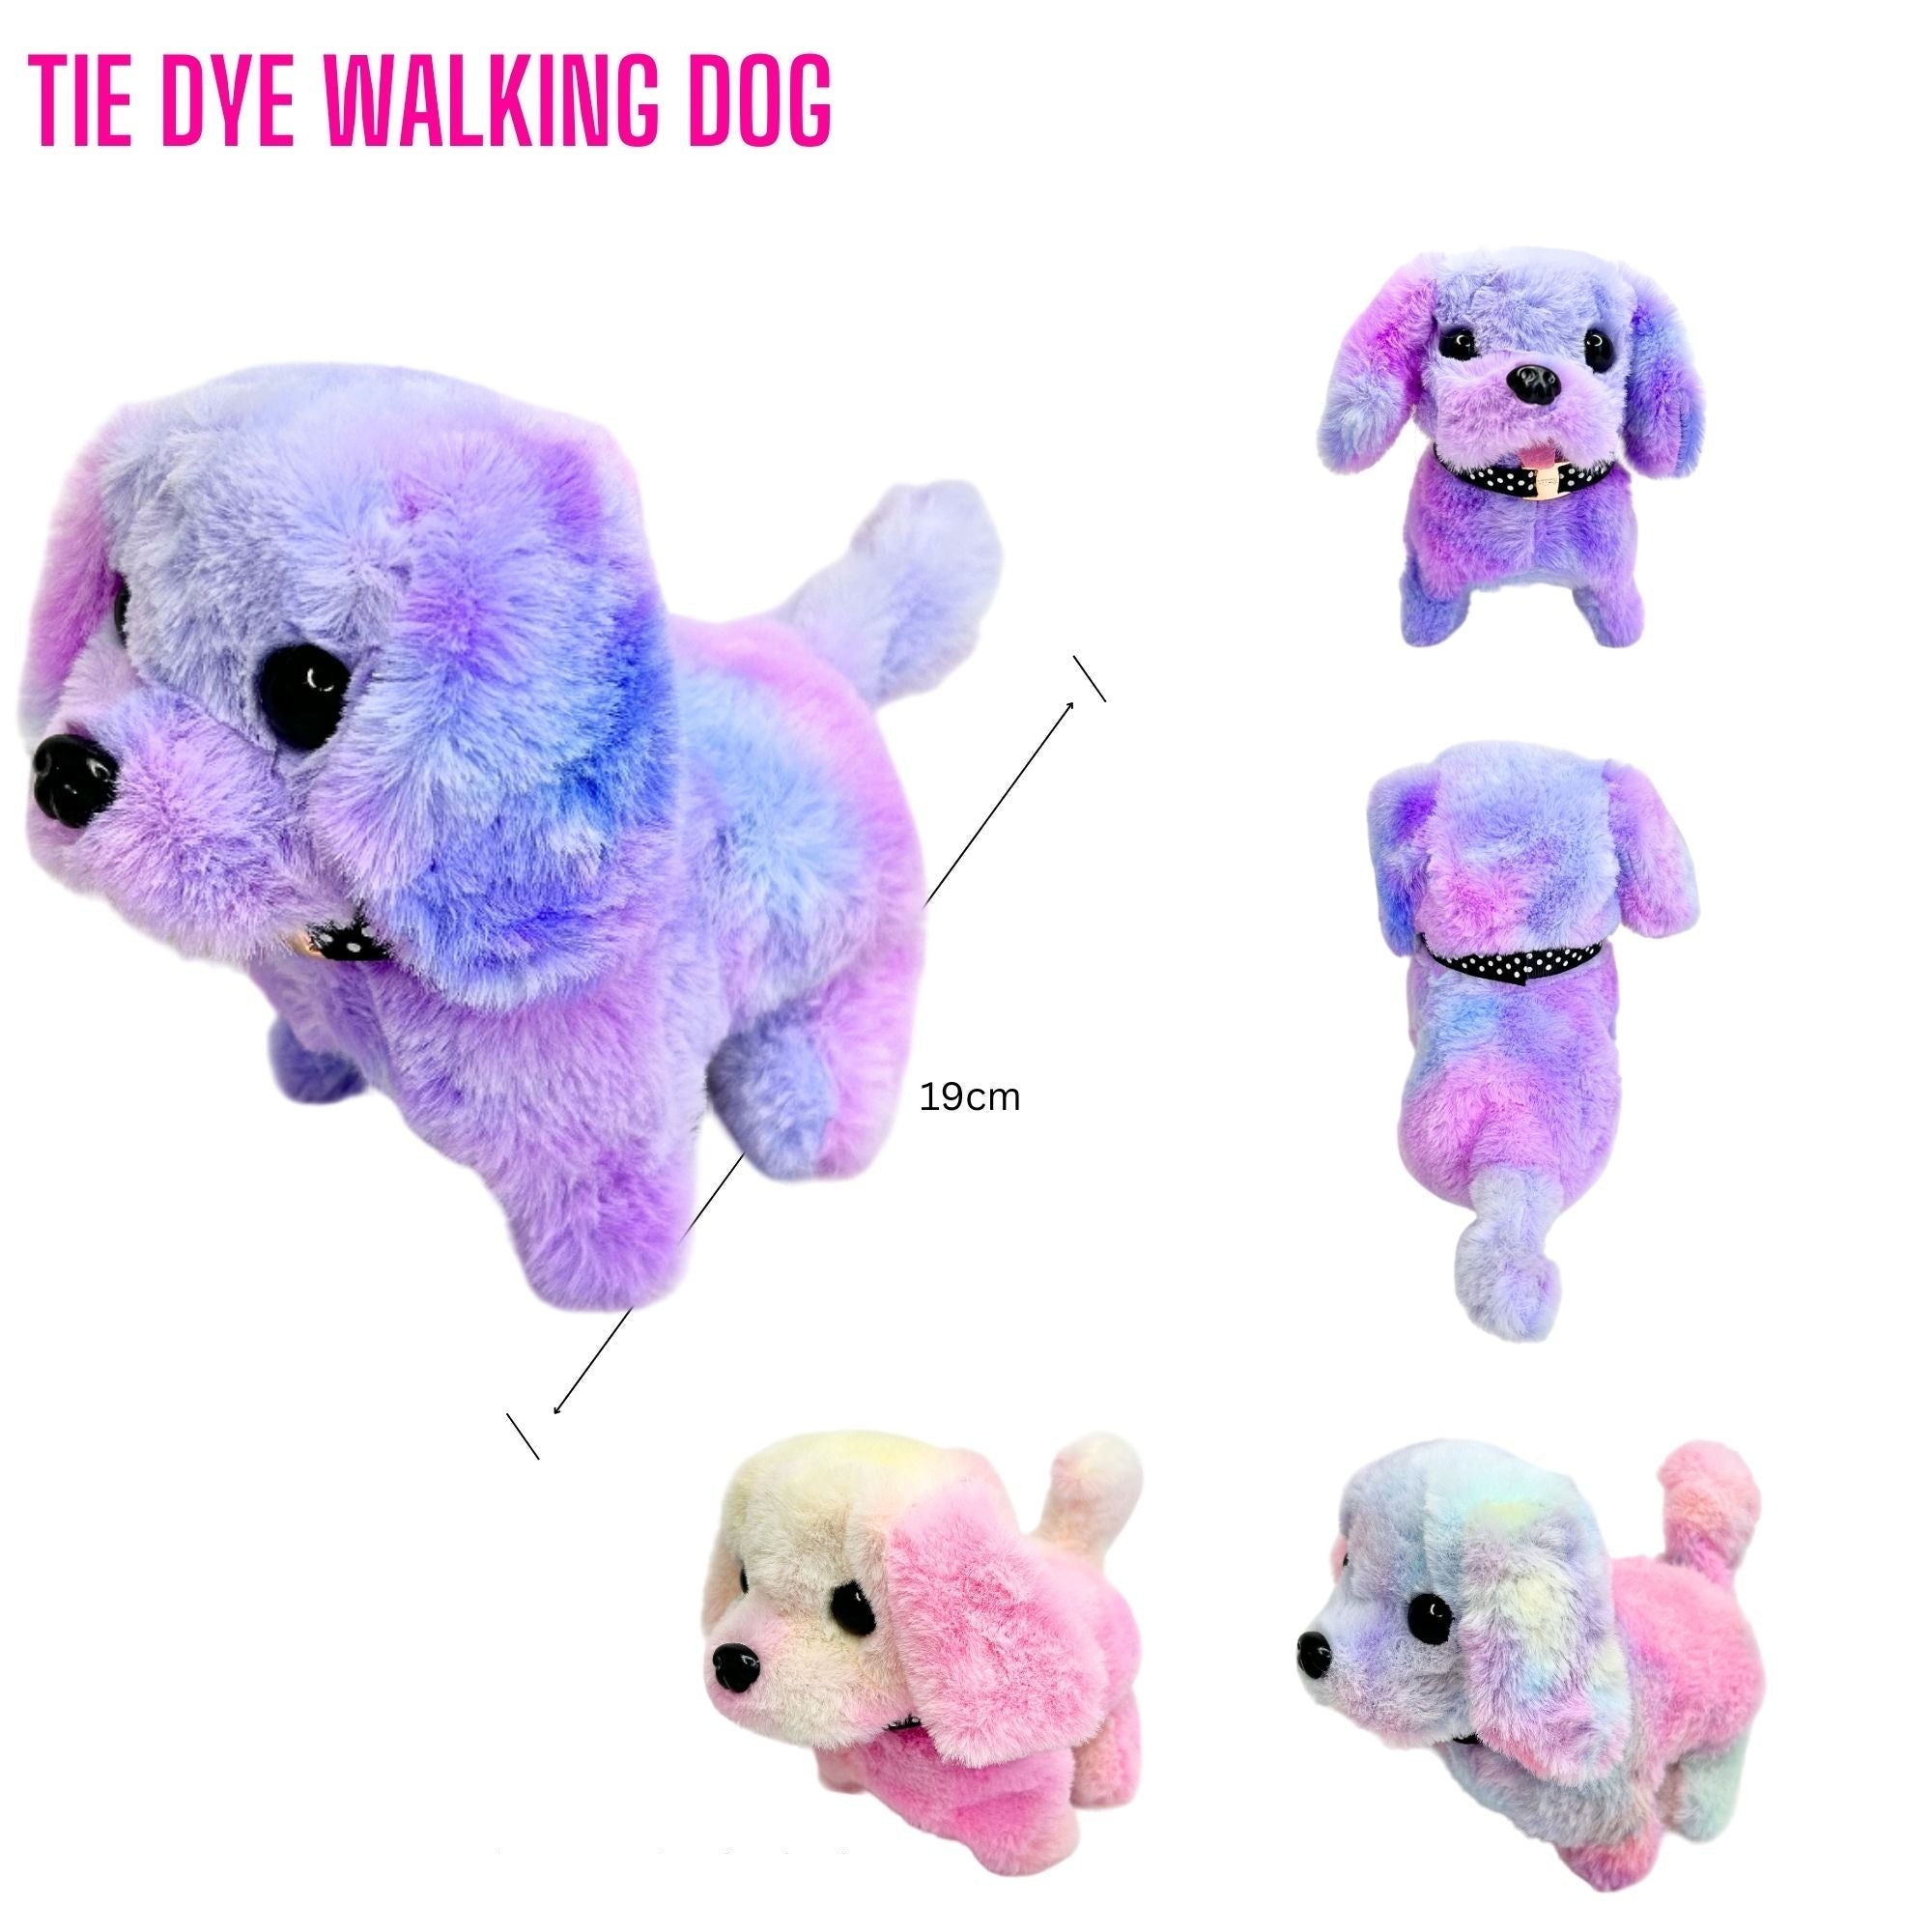 Tie Dye Walking Dog with Sound all batteries included